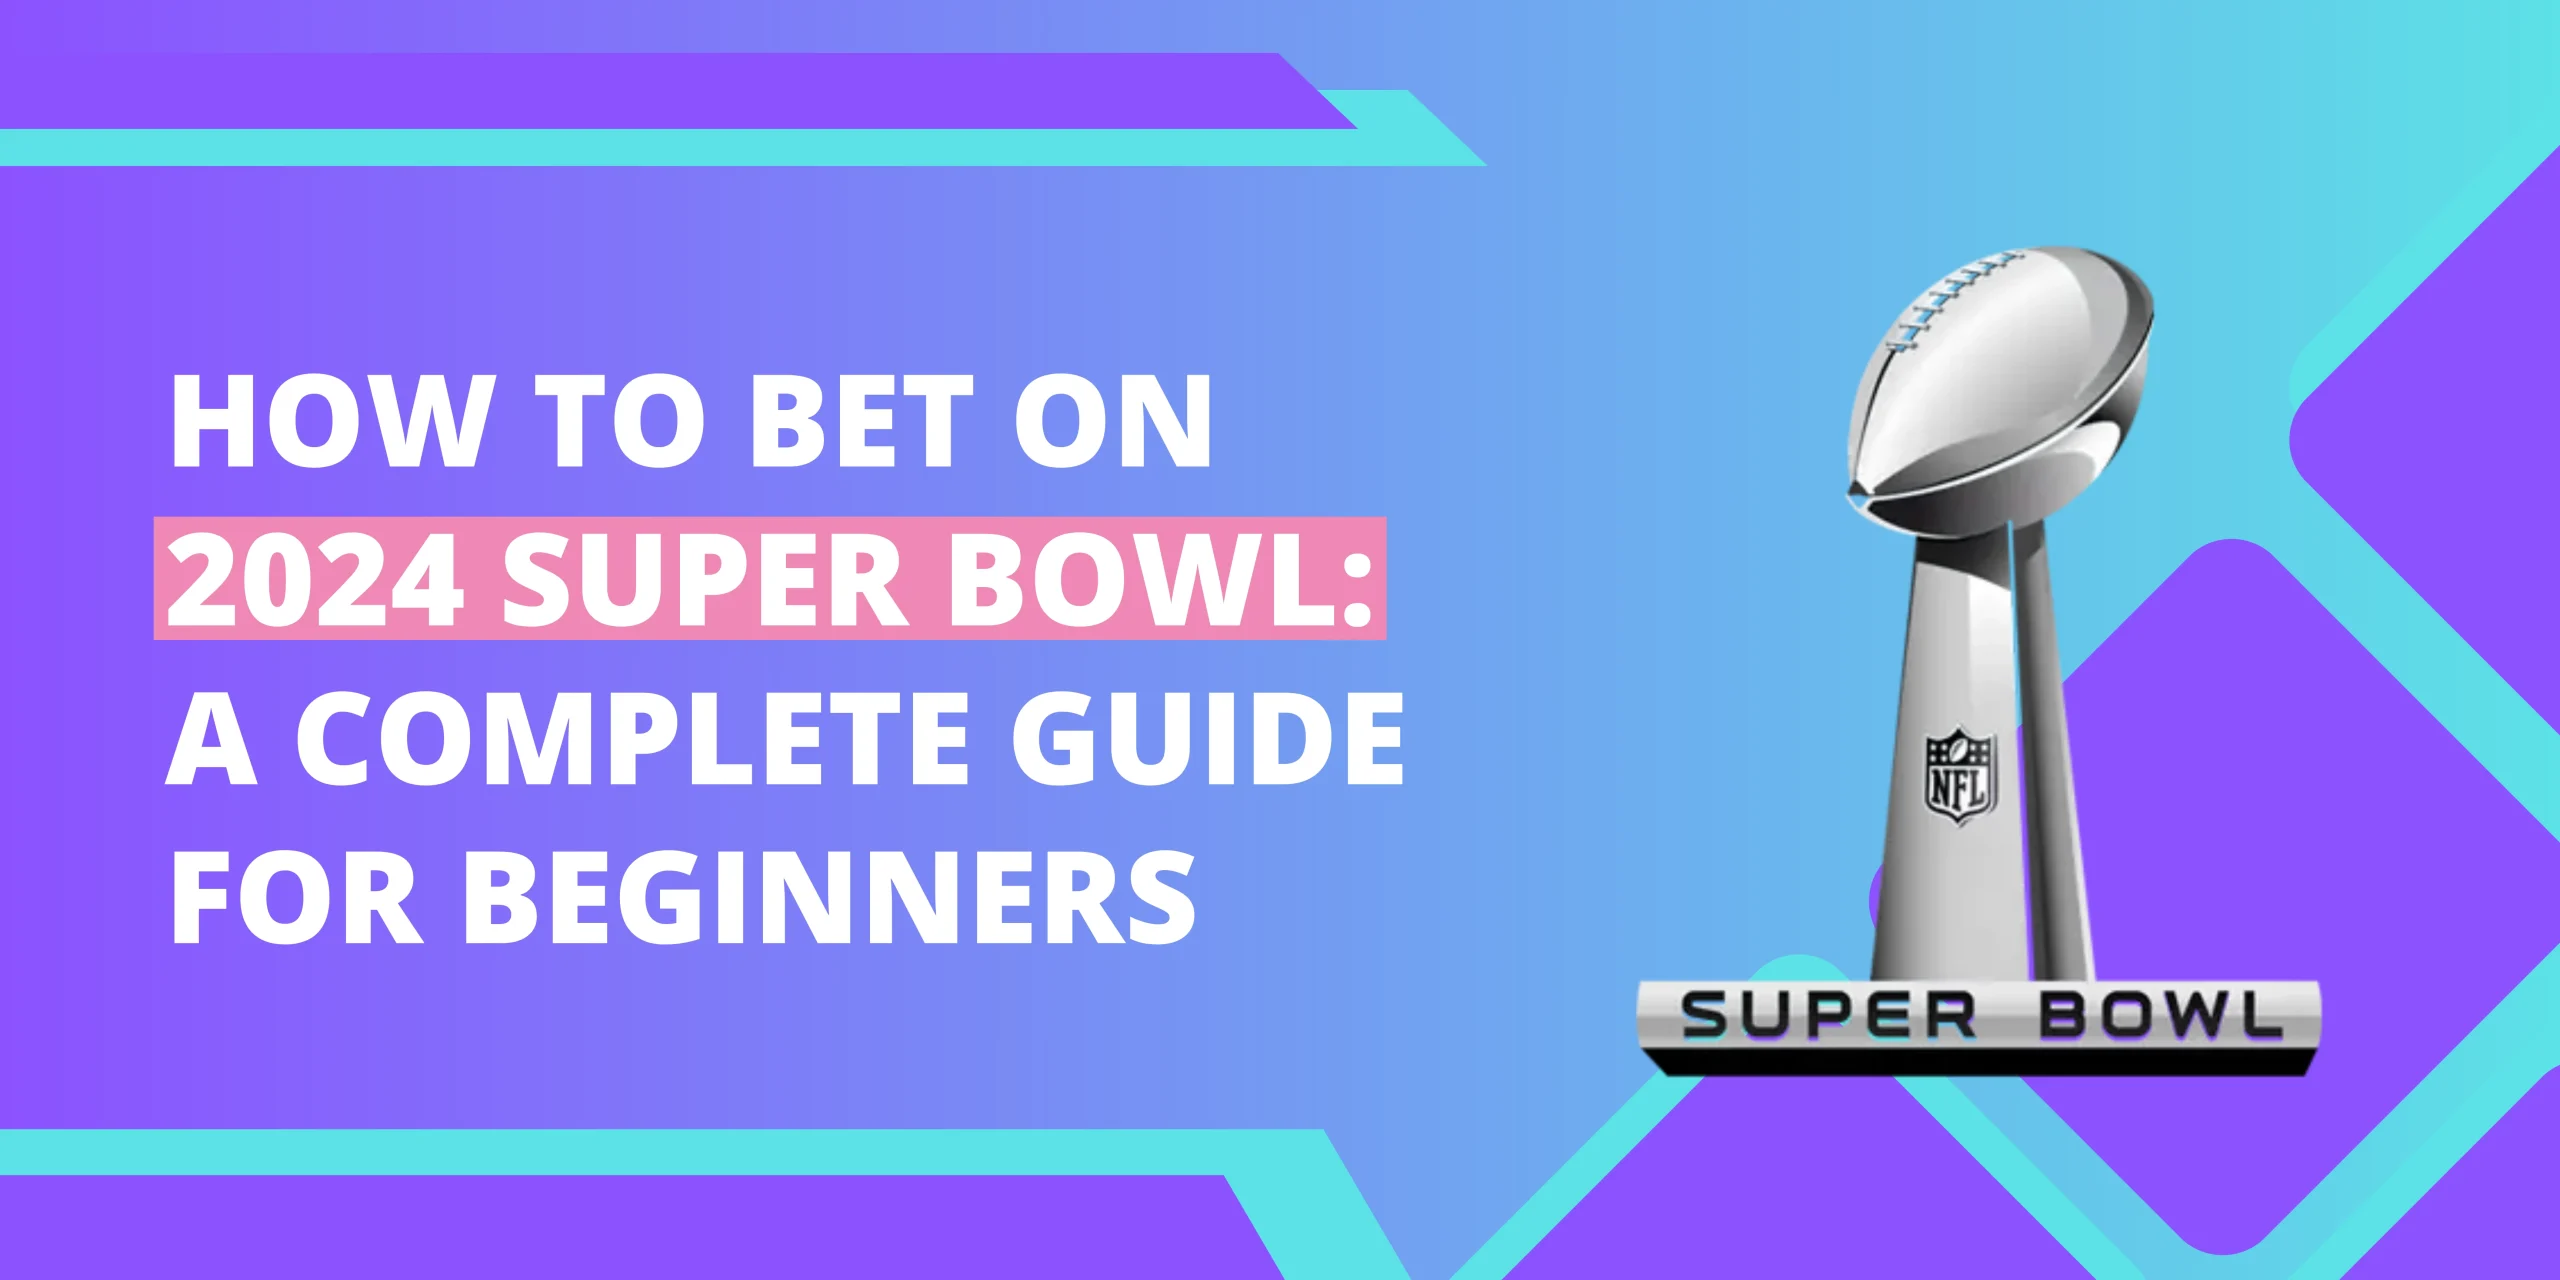 Bet on the 2024 Super Bowl at OKBet! Experience top-notch sports betting with competitive odds. Place your bets confidently and enjoy the game!